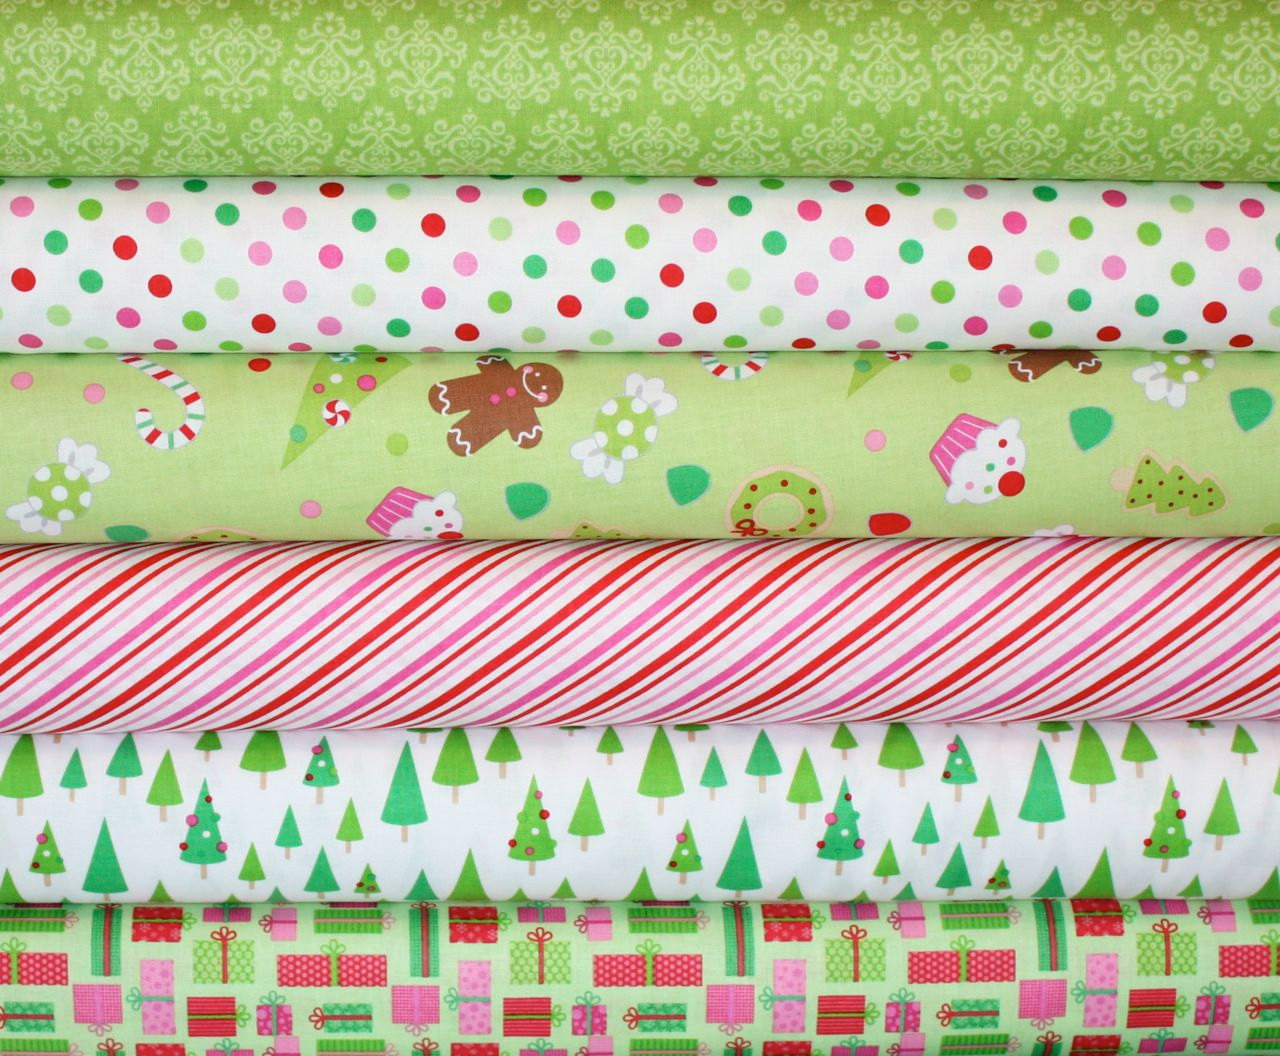 Christmas Candy Fabric
 Candy Christmas Fabric by Doodlebug Designs for by